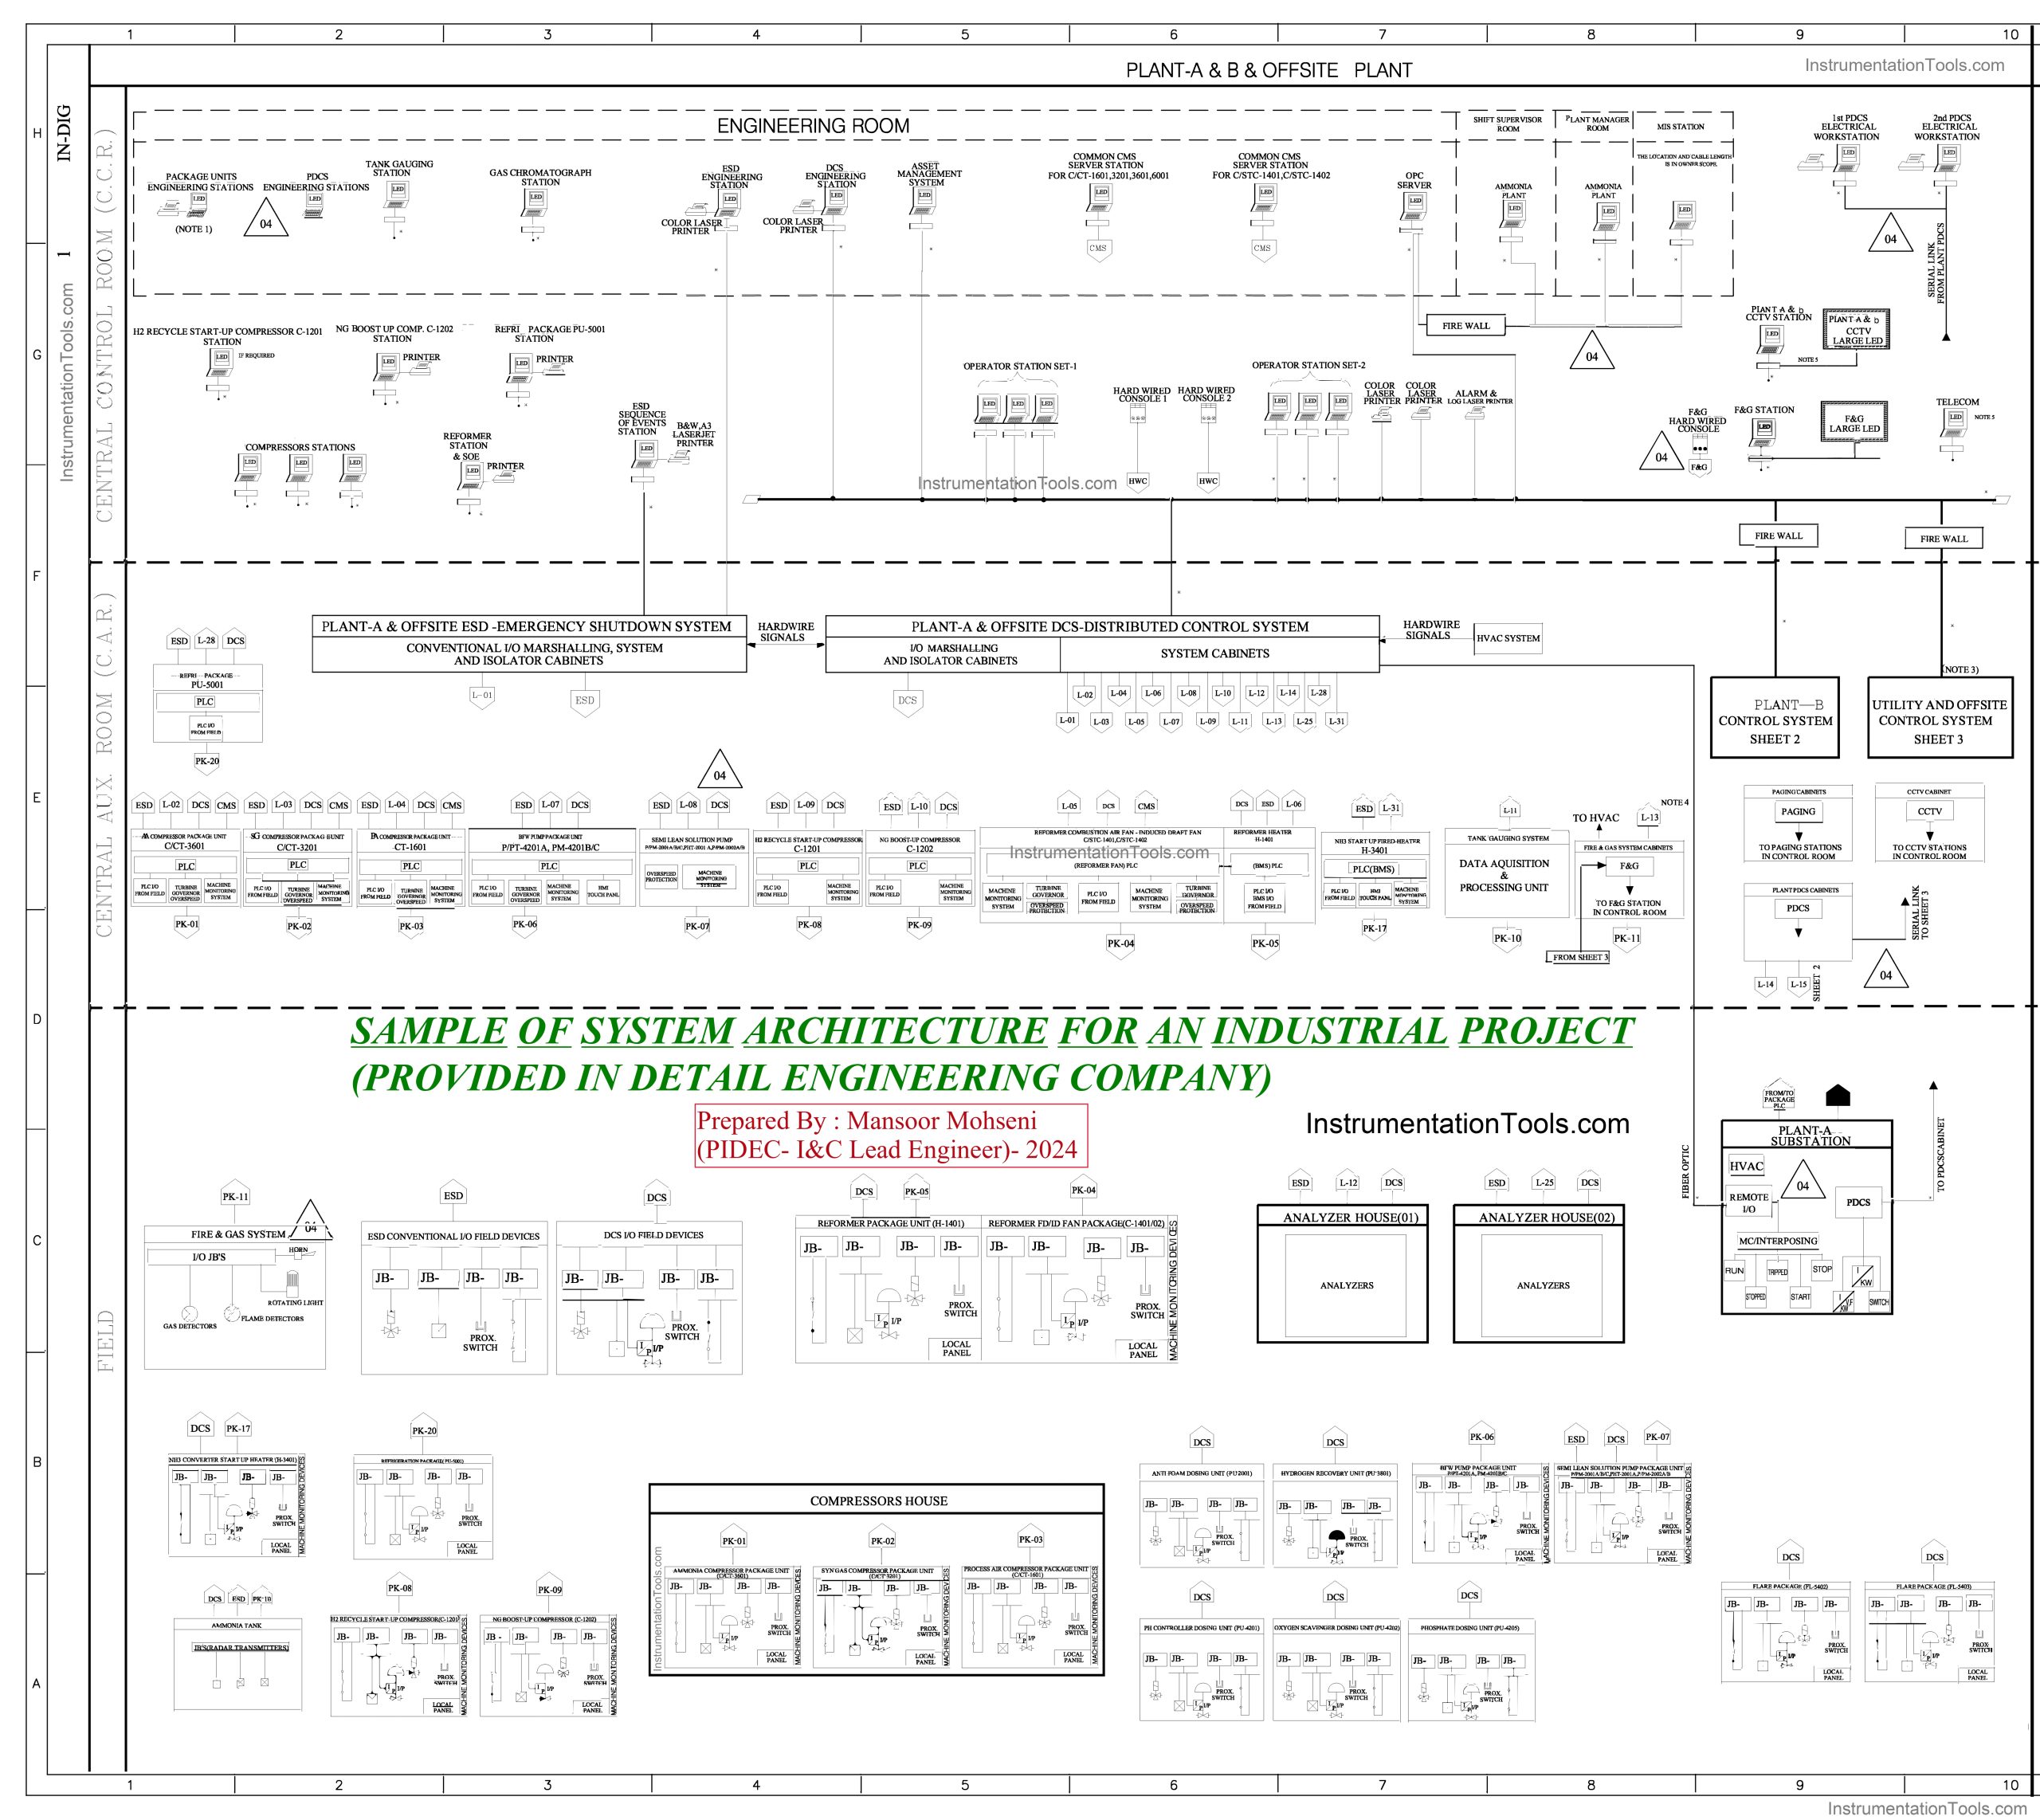 System Architecture Diagram Provided in Detail Design Engineering Company